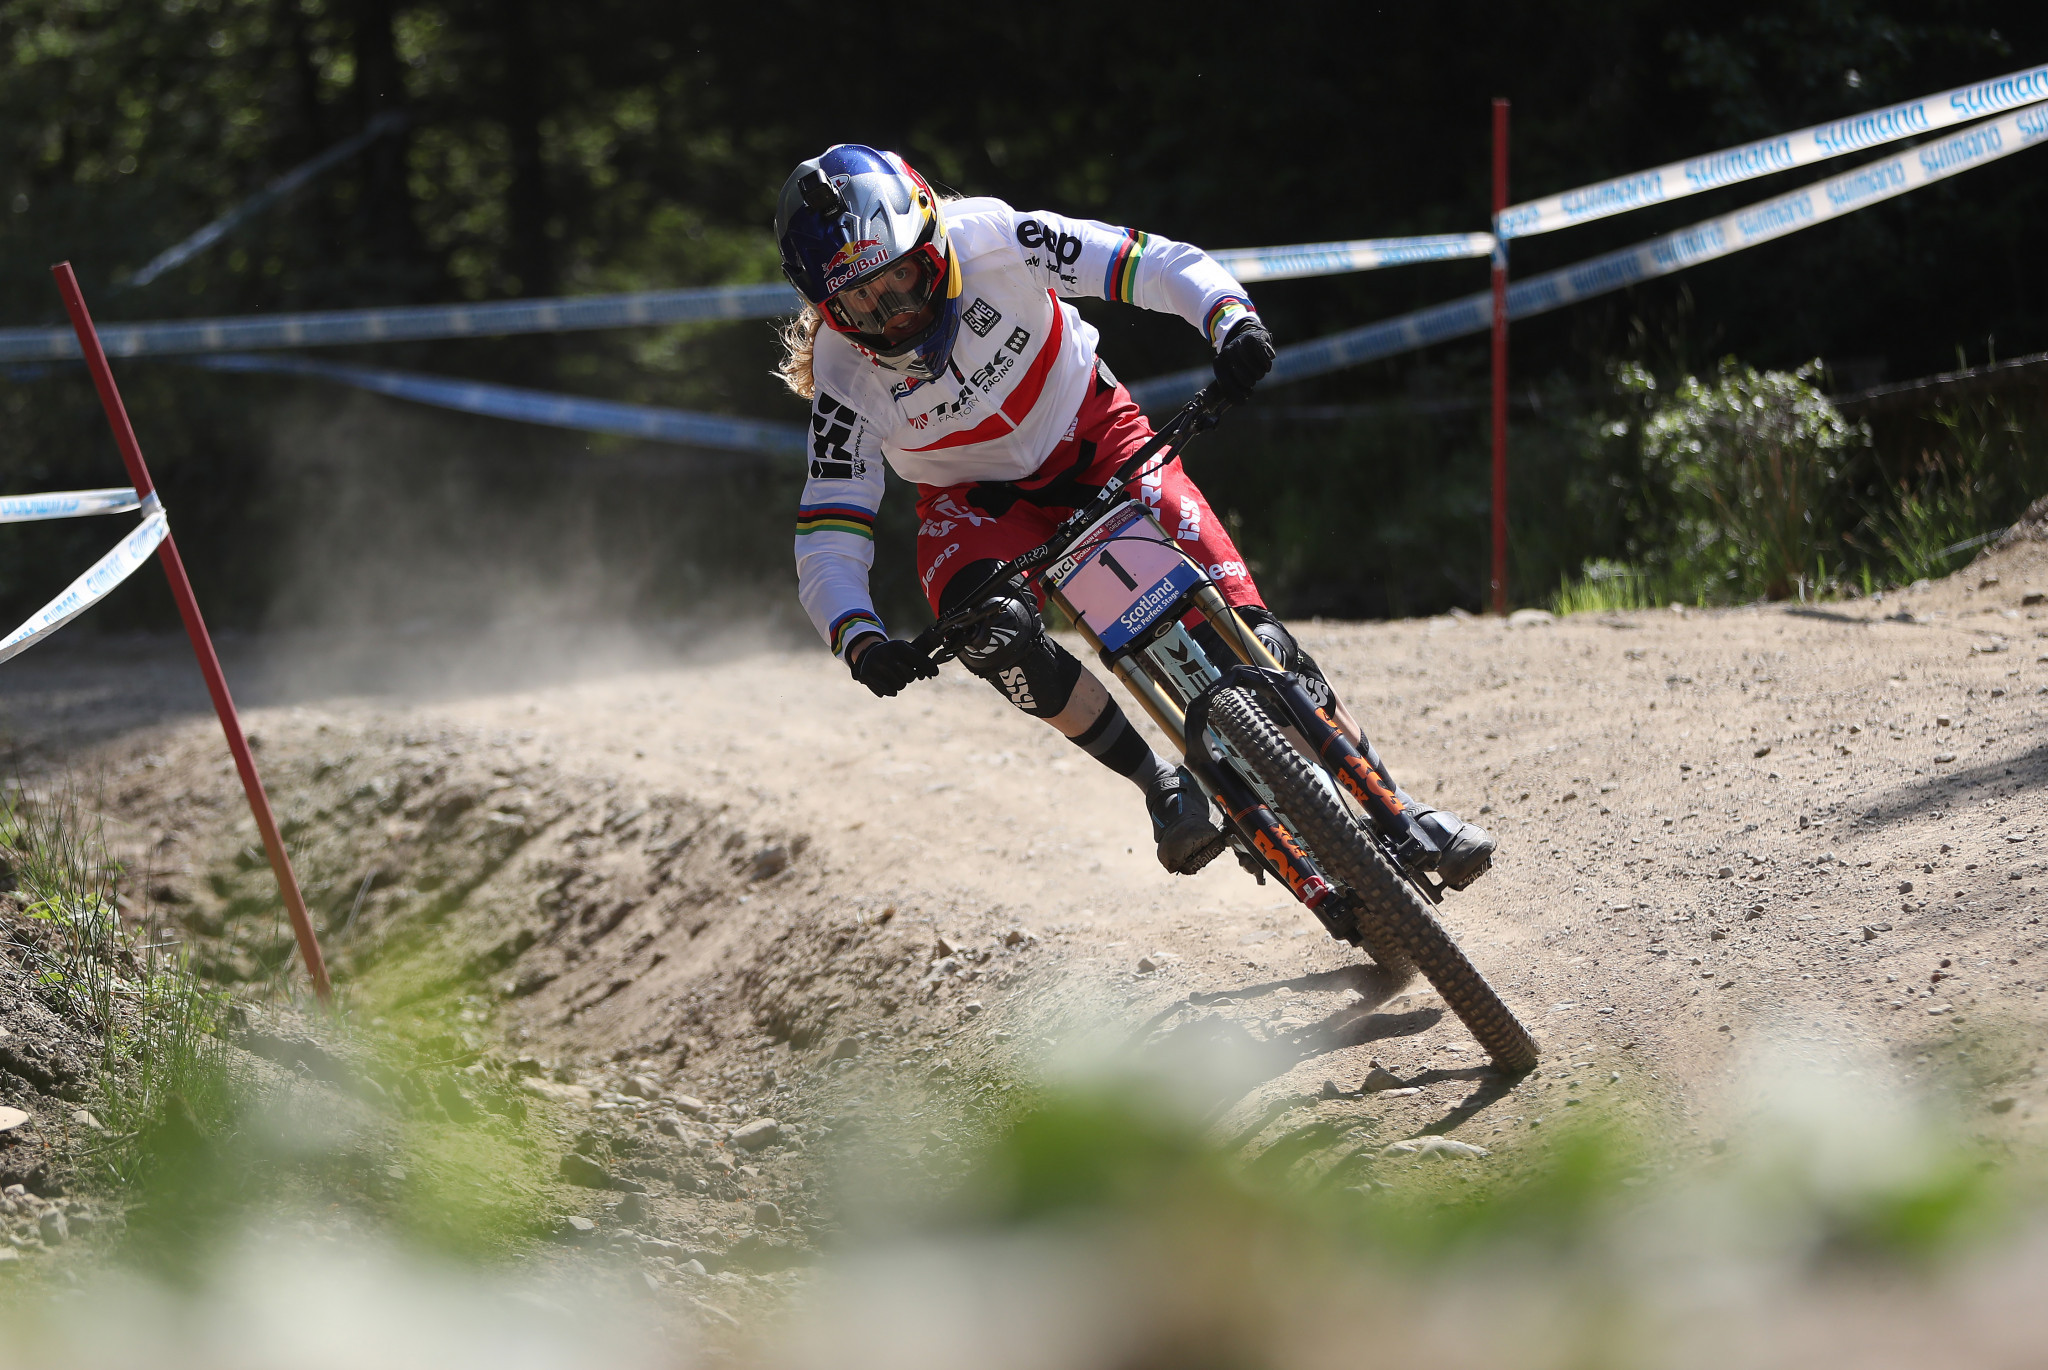 UCI Mountain Bike Downhill World Cup set to continue in Fort William